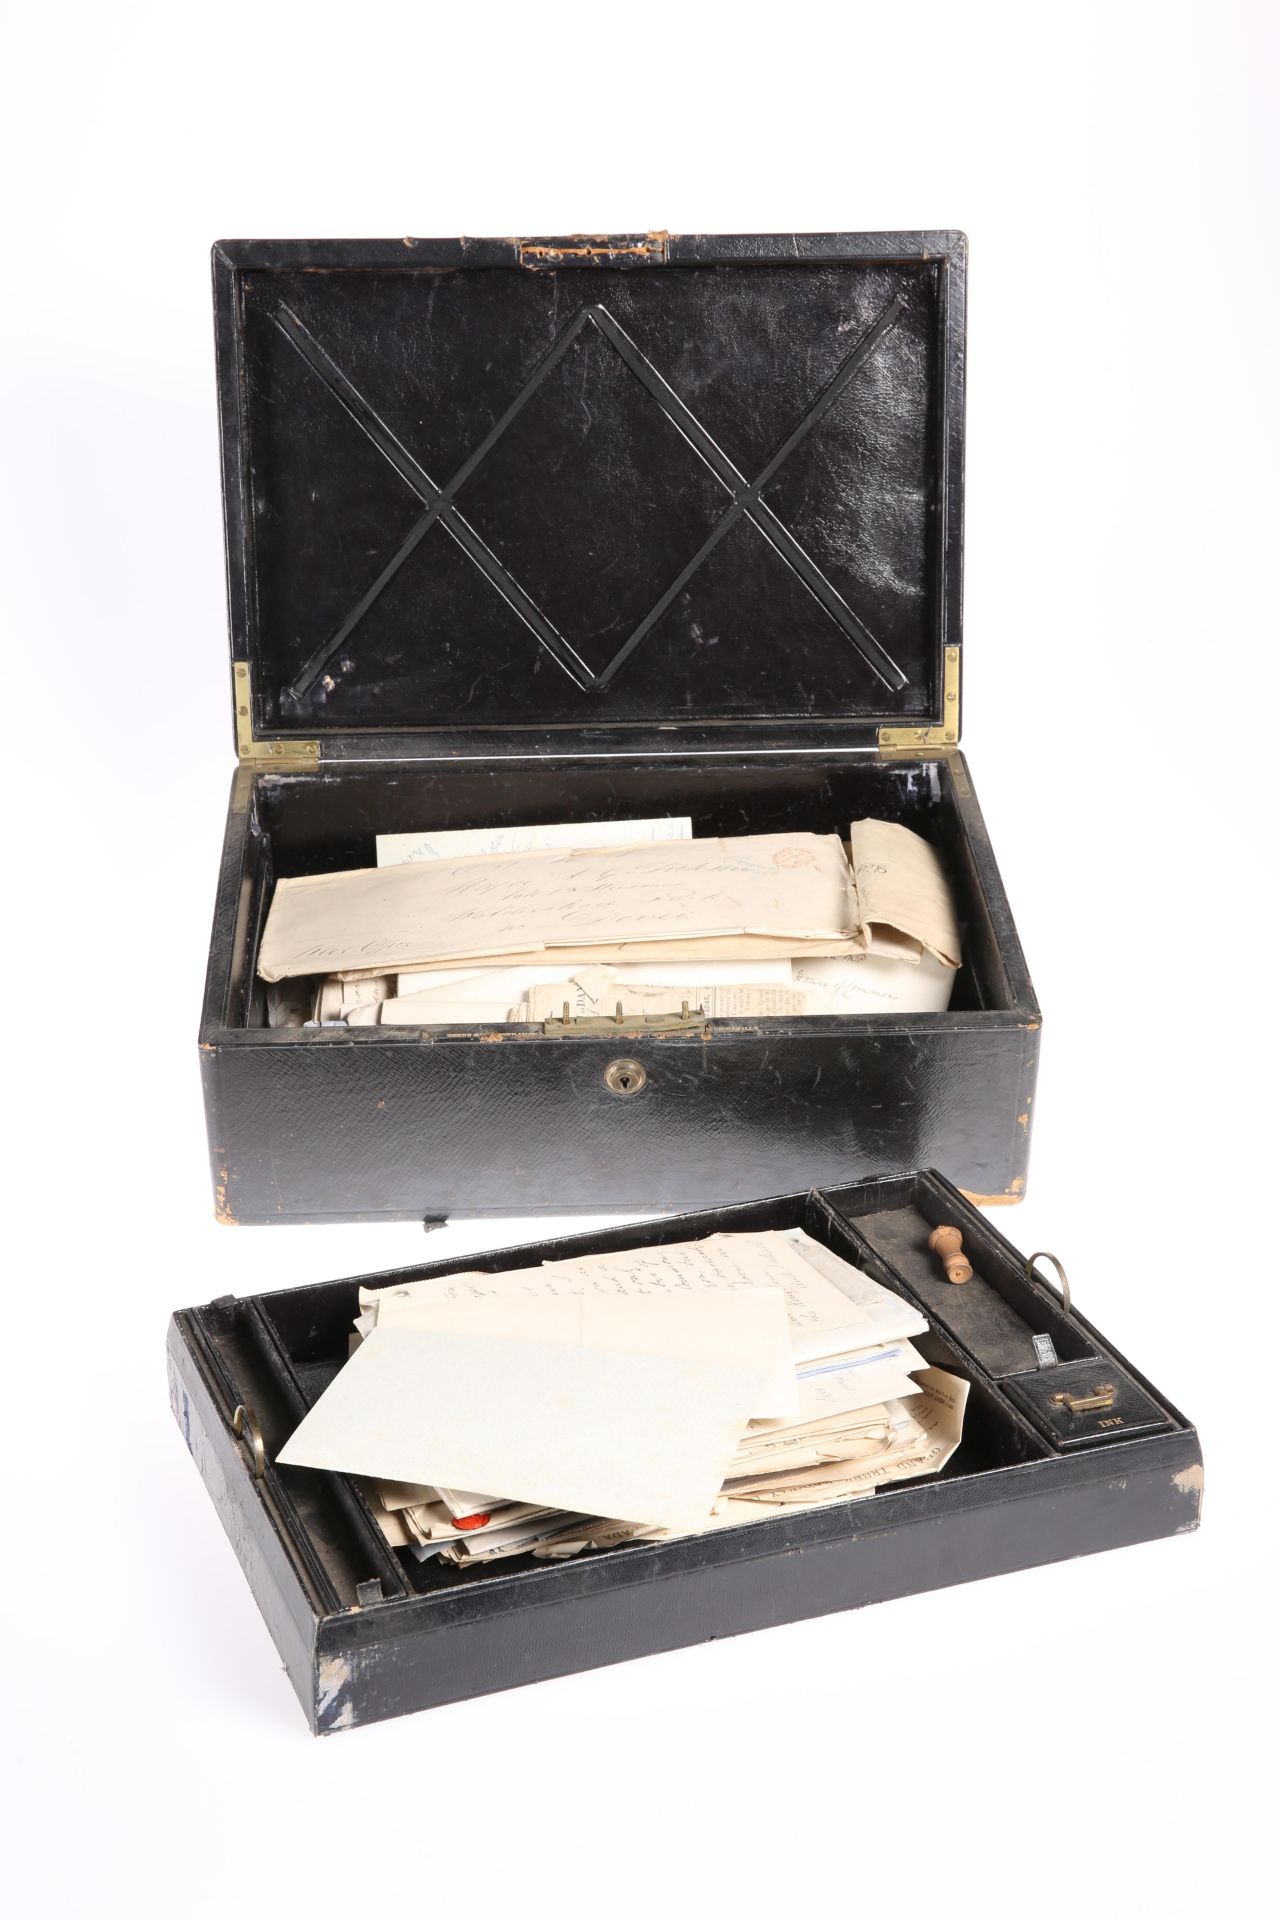 ~ A LATE VICTORIAN LEATHER-BOUND DISPATCH BOX, signed Needs & Co, Piccadilly, containing a lift-